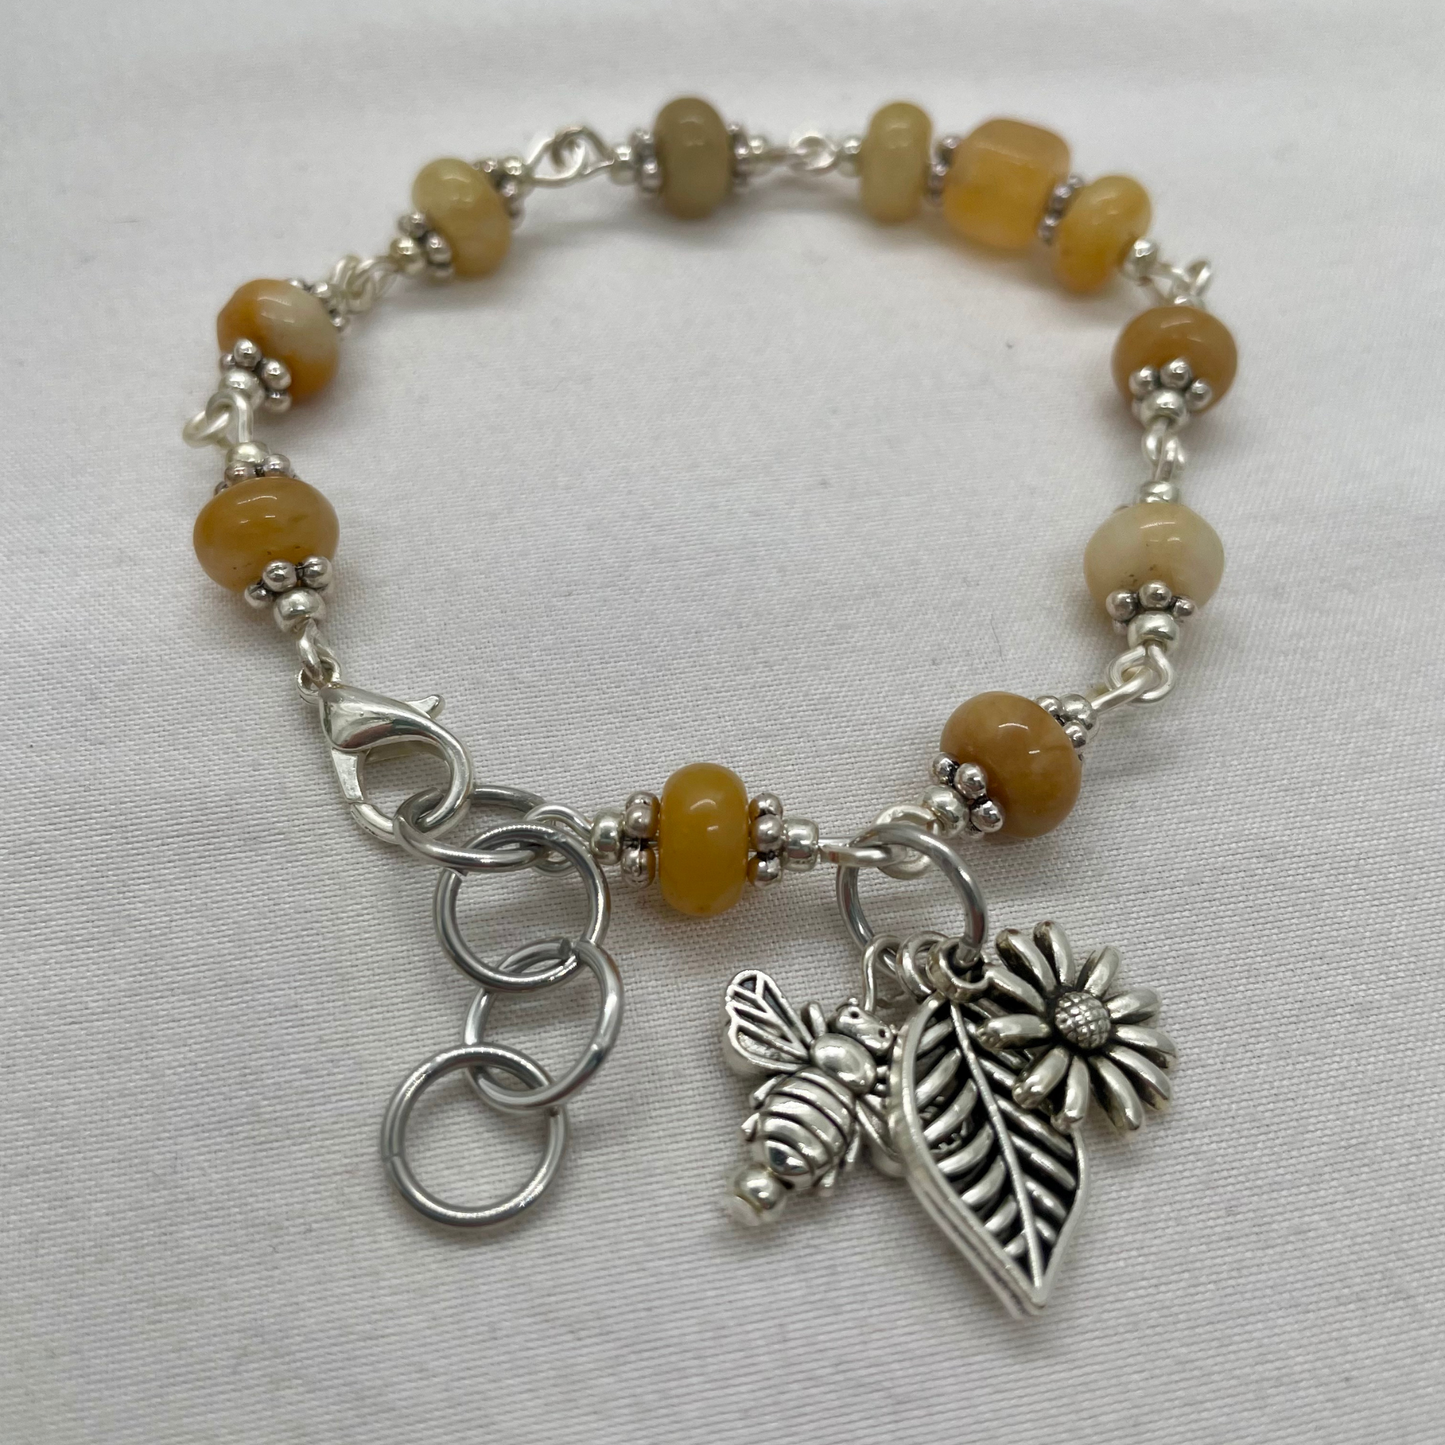 Honey Sunshine Citrine Bracelet: Artisan Crafted with czech glass and citrine beads for Prosperity and Positivity | summer gift | bee love